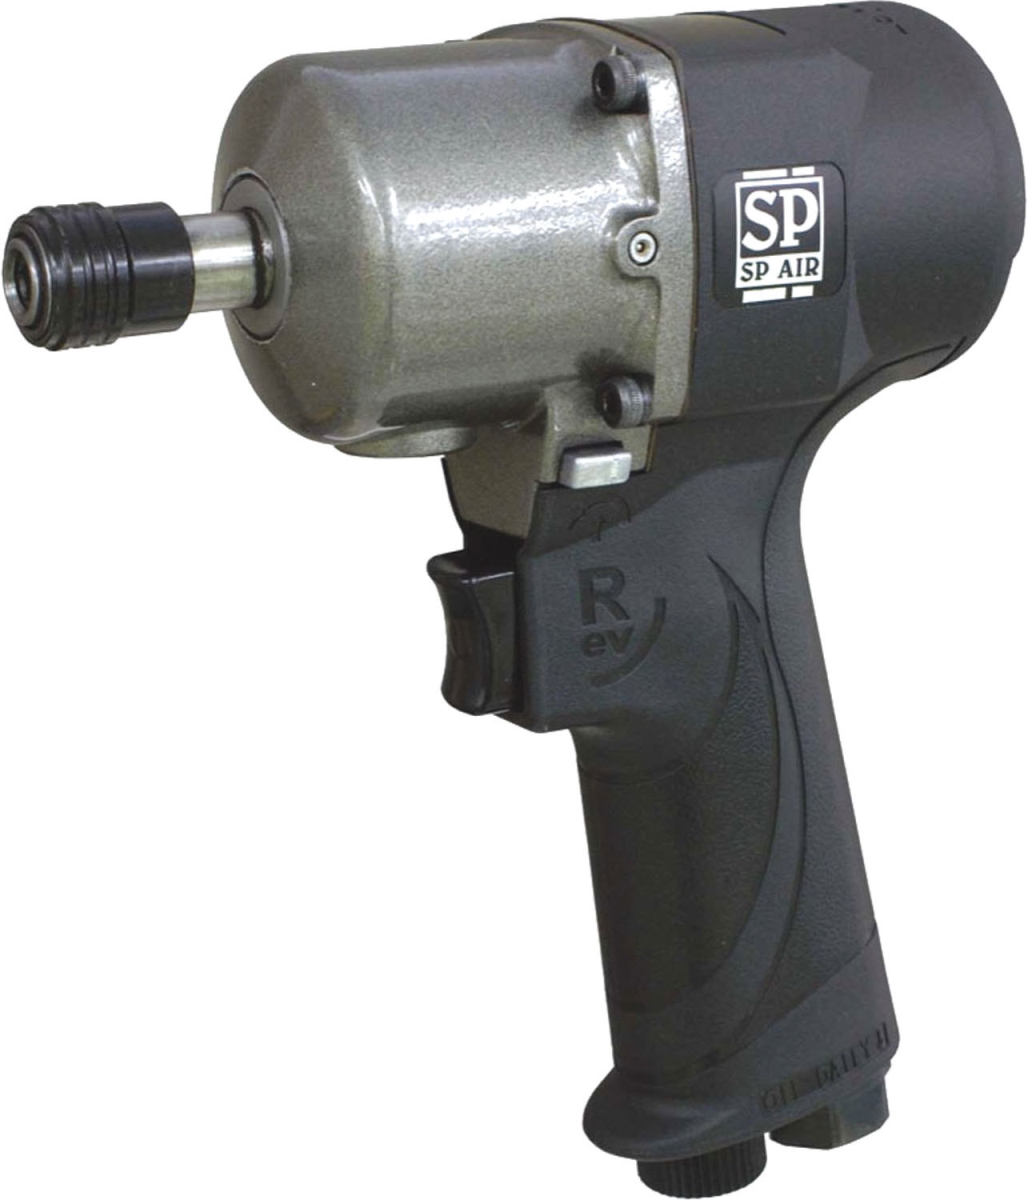 Spa-sp-7146h 0.25 In. Hex Impact Driver